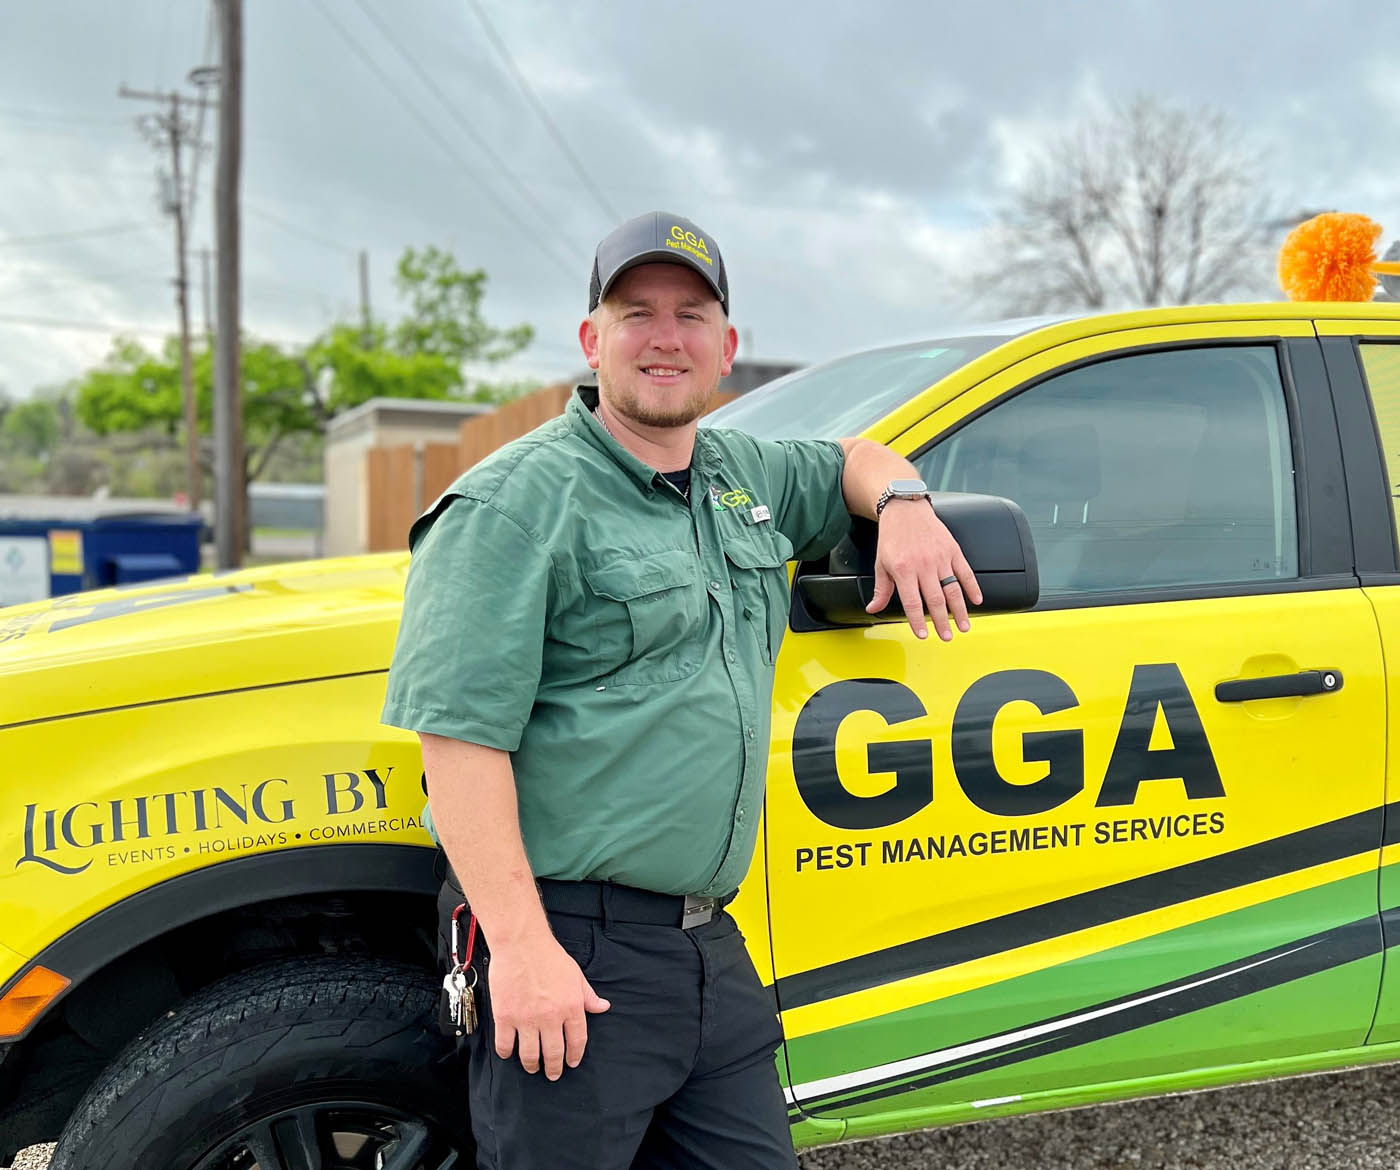 A GGA Pest Management professional standing in front of a vehicle - learn how we can help with the best bed bug exterminator services.